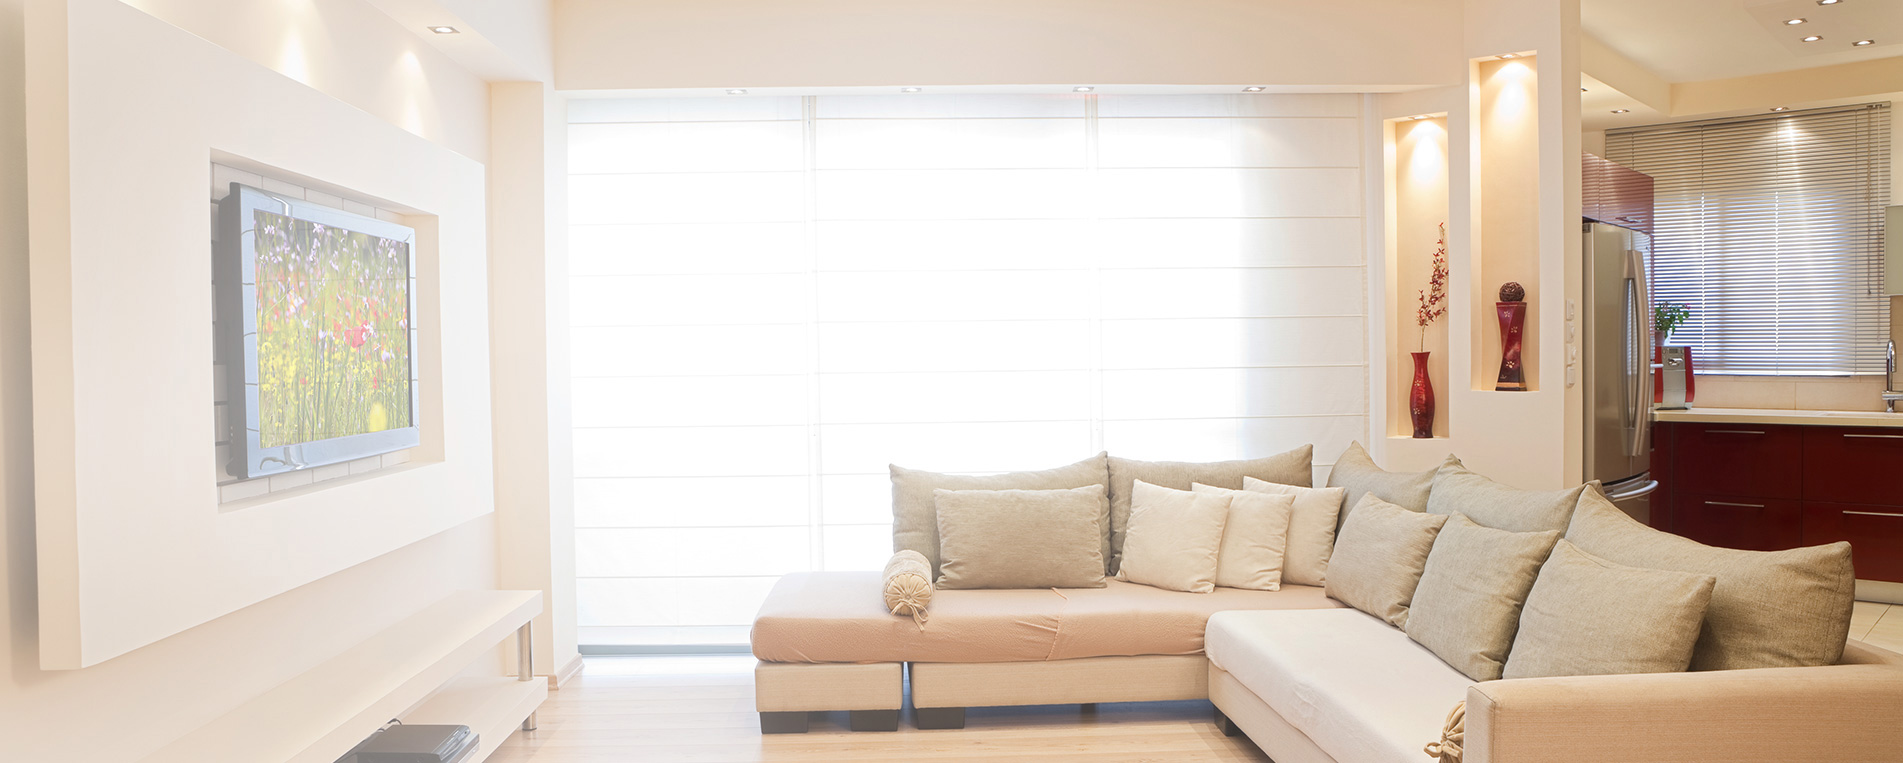 Electric Roller Shades For Brentwood Home